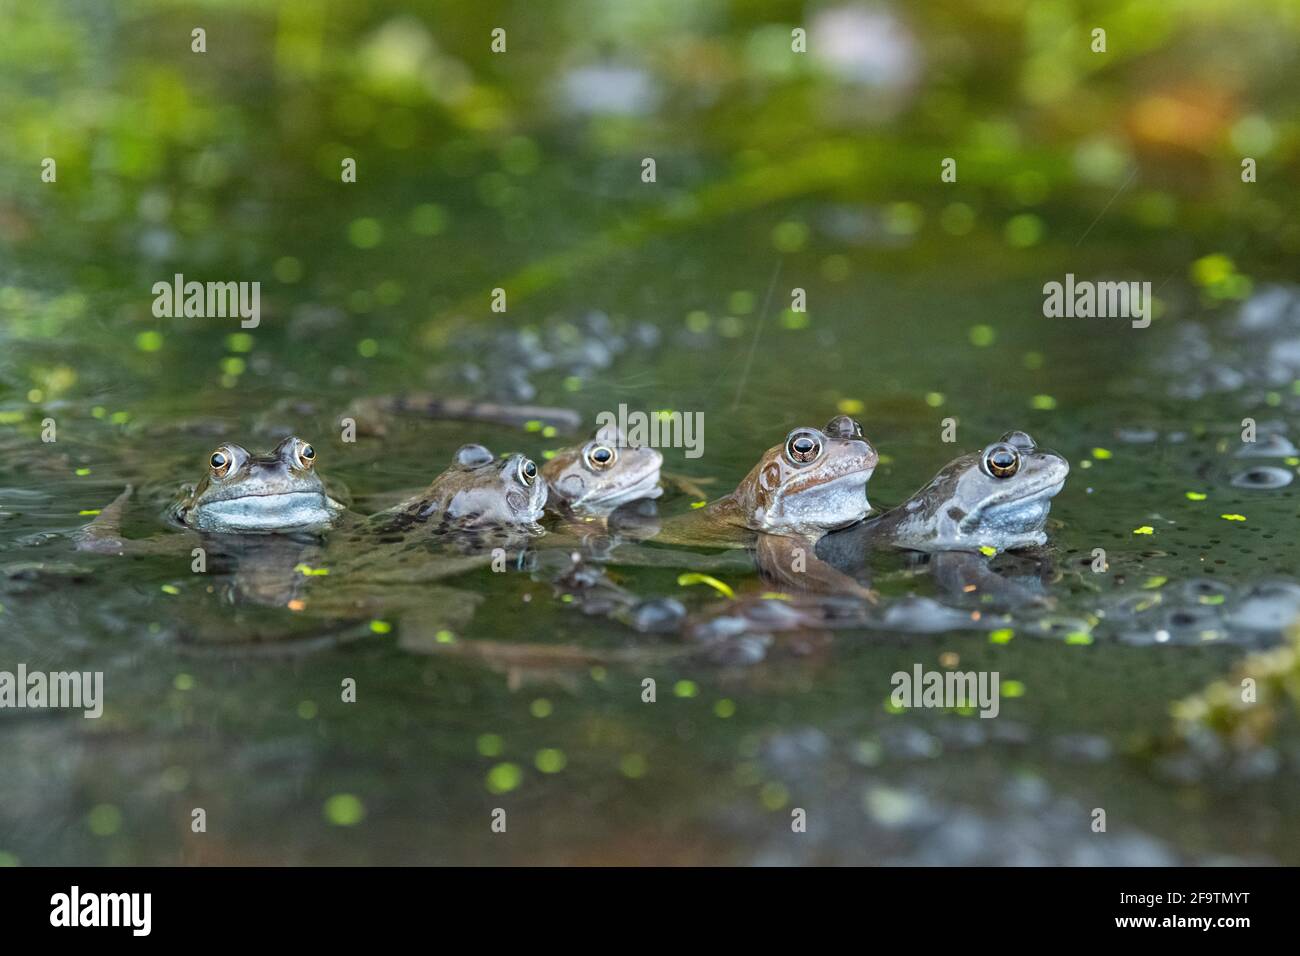 Line of common frogs in pond surrounded by frogspawn in spring - UK Stock Photo